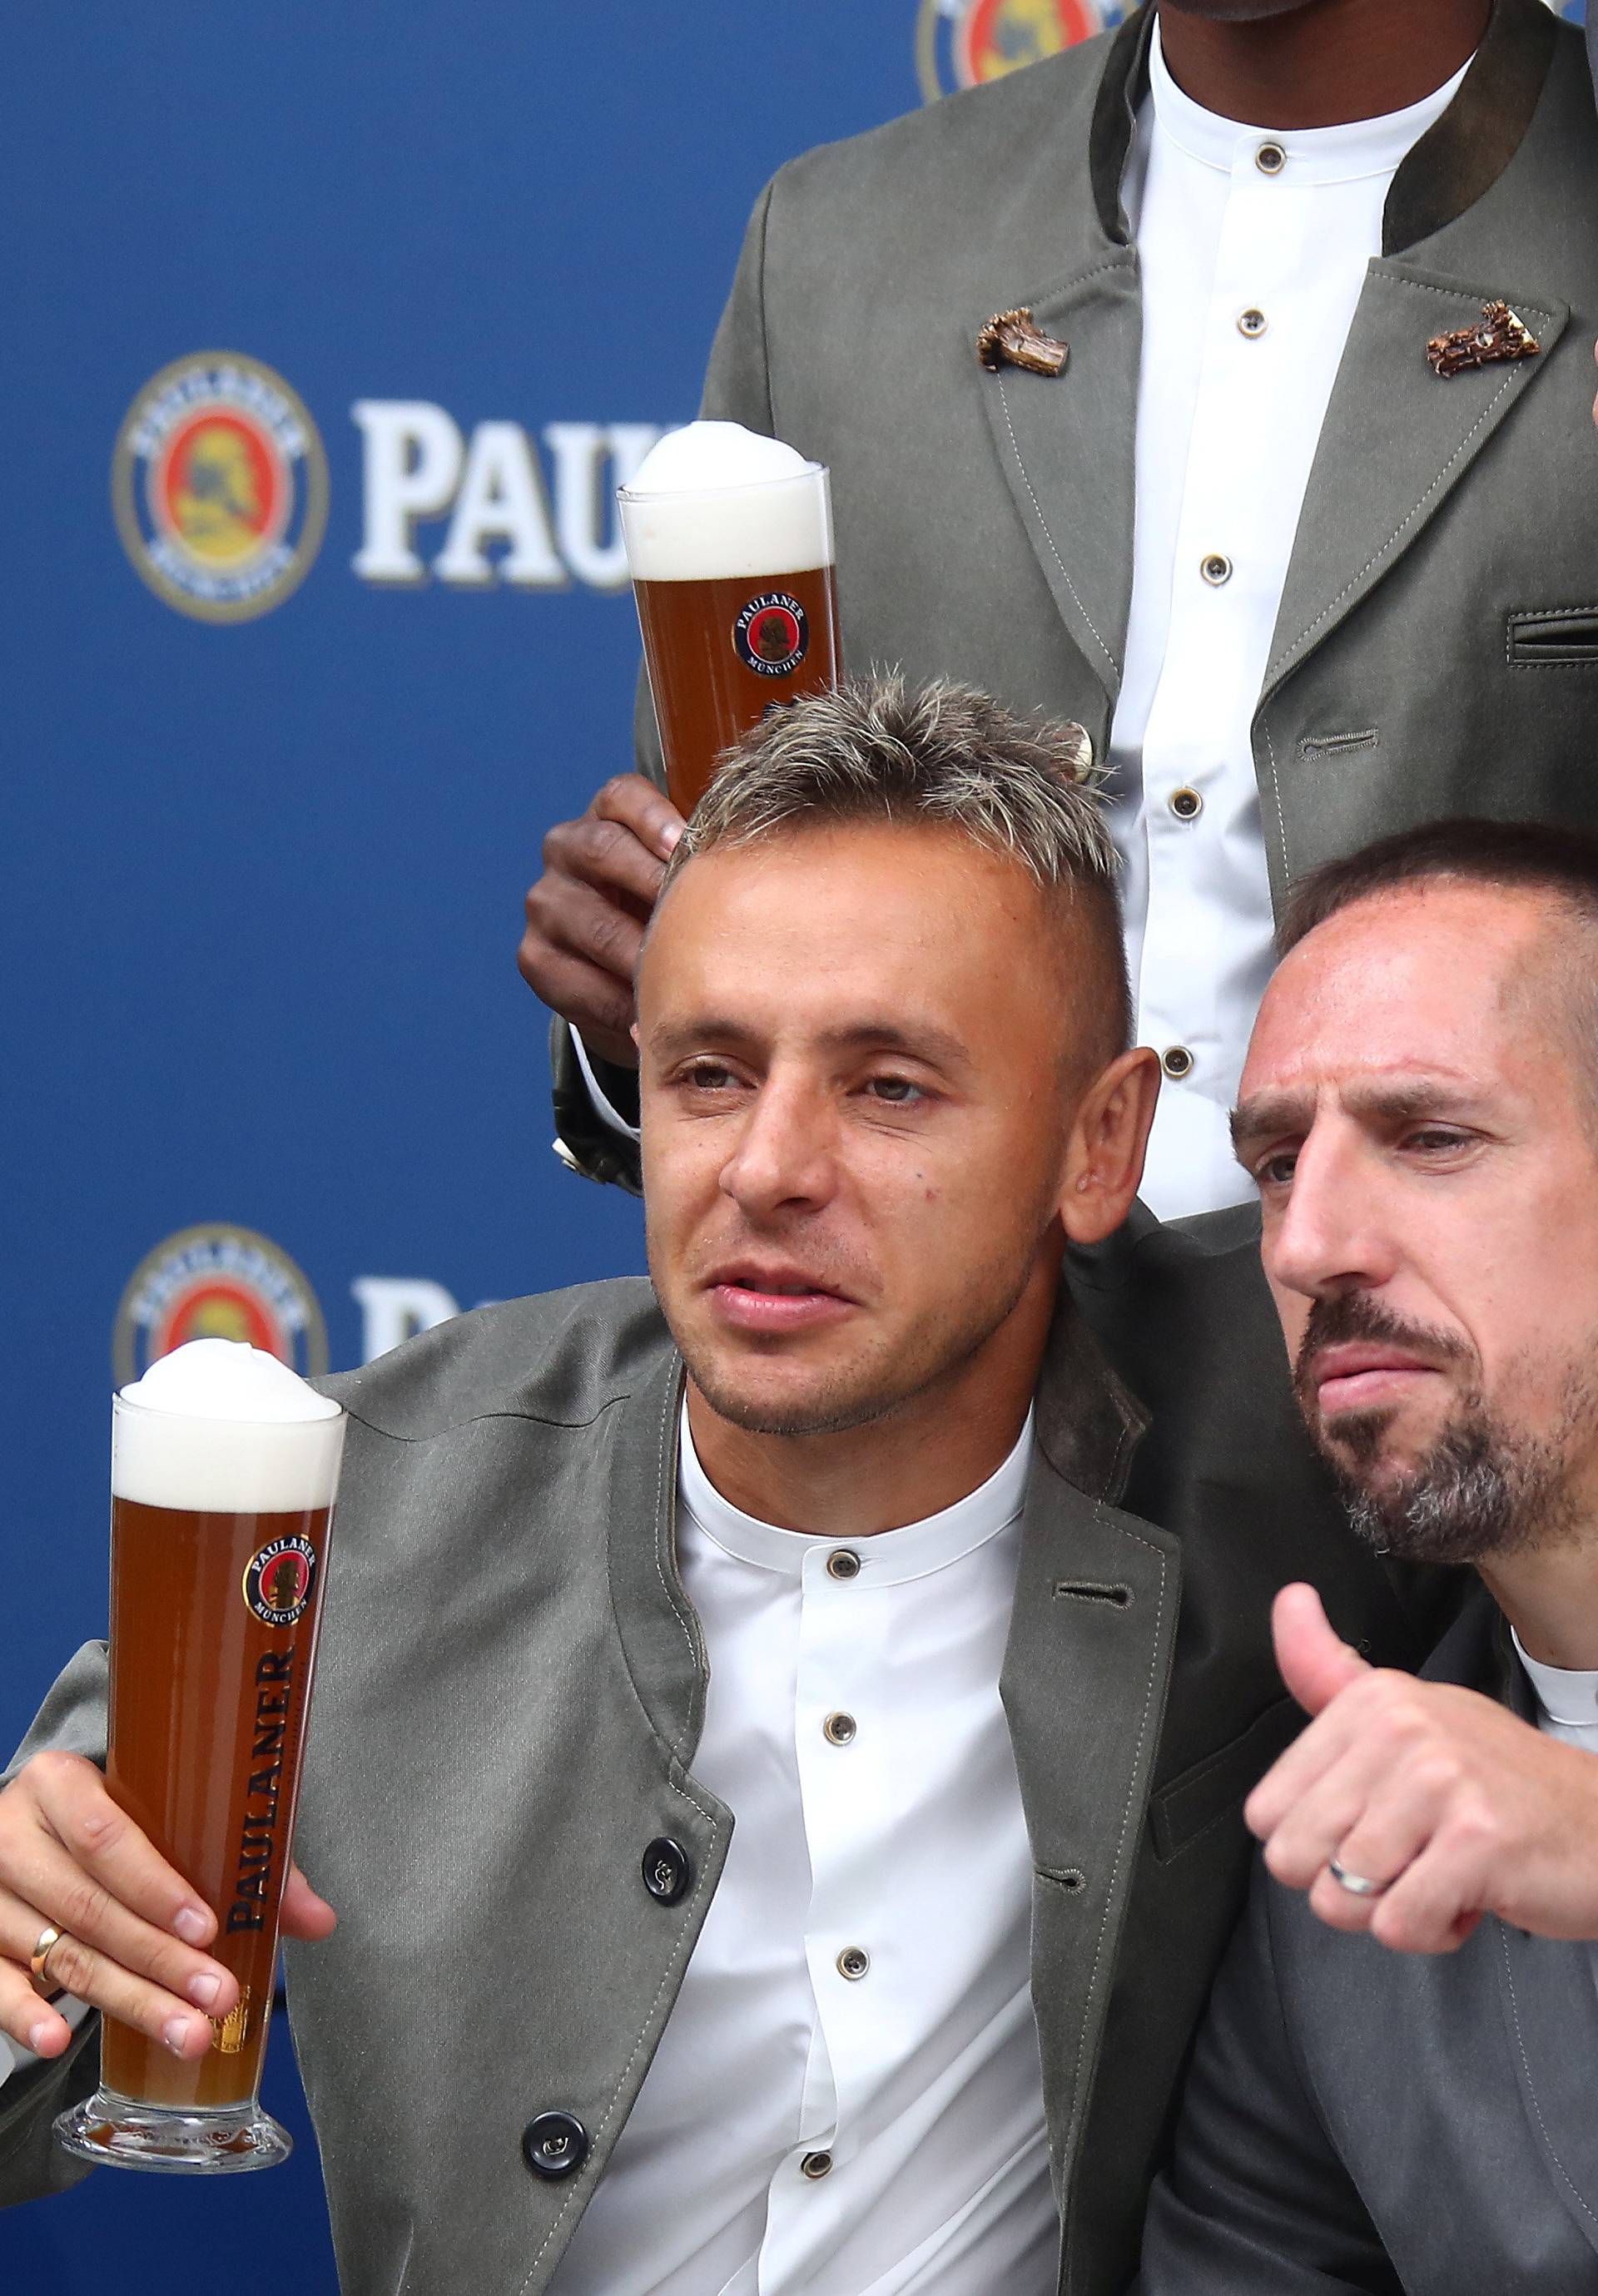 Bayern Munich's soccer team wearing traditional attire, toasts with beer during photocall in Munich